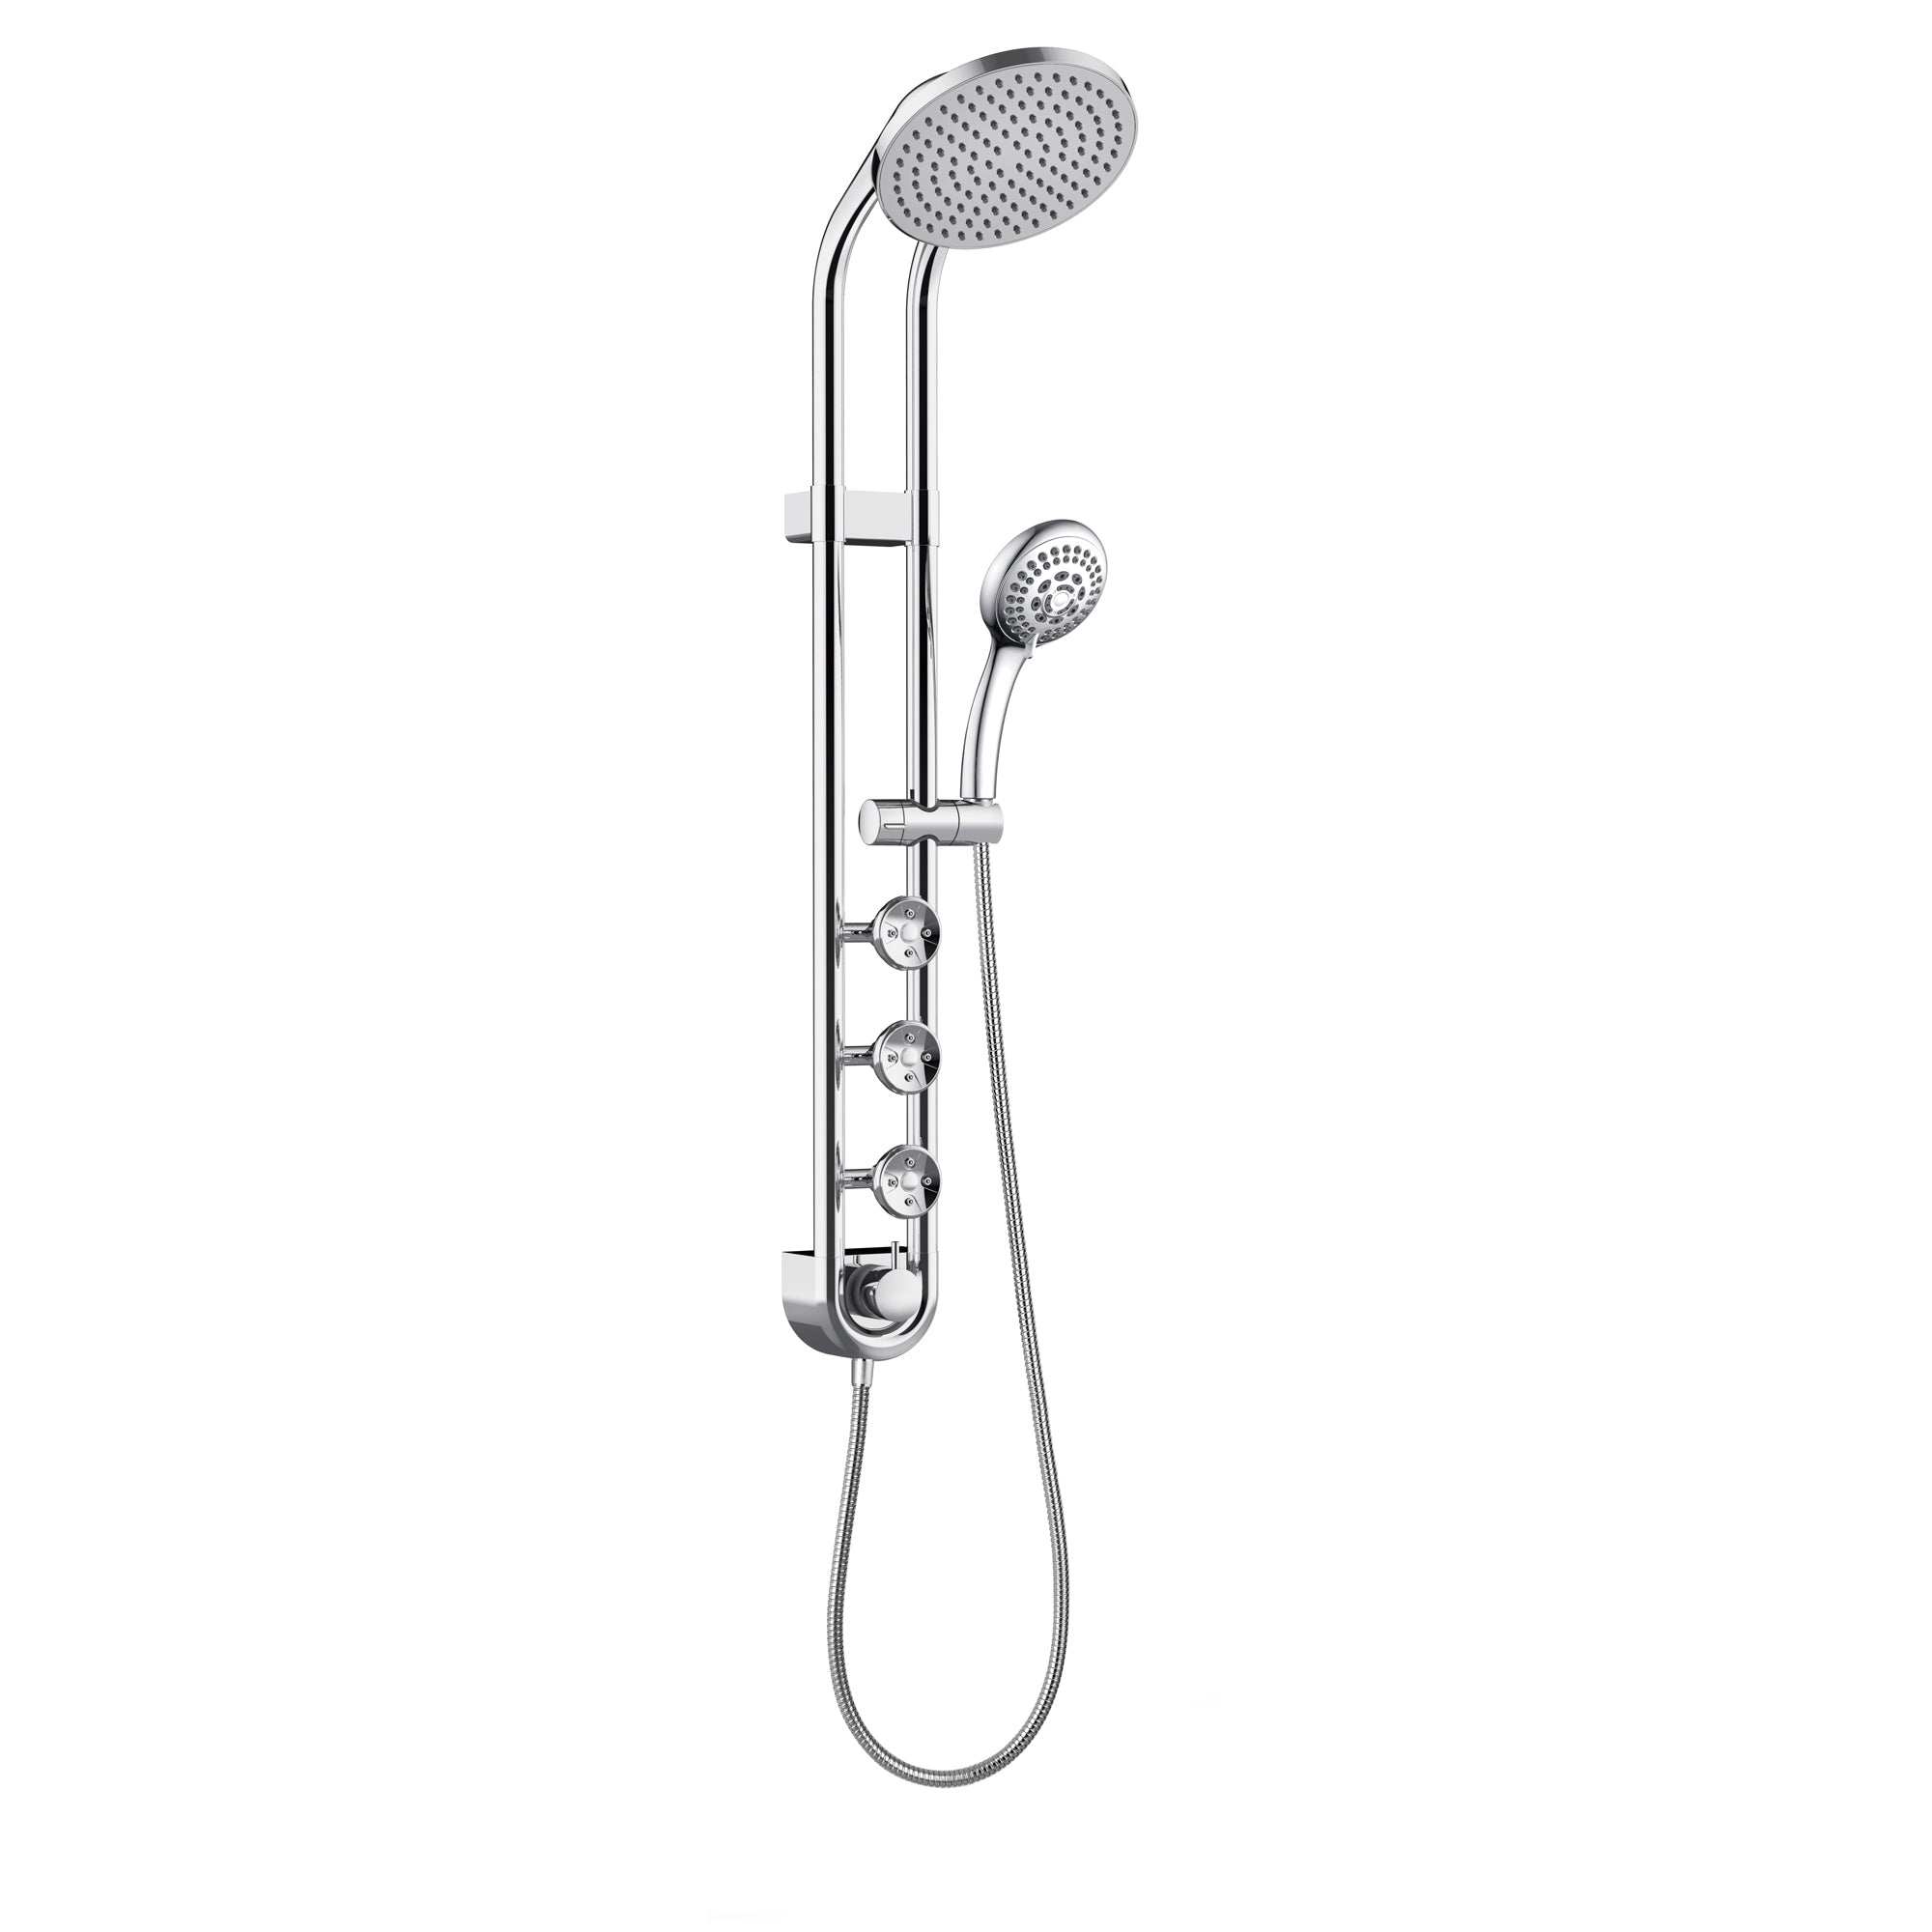 PULSE ShowerSpas Chrome Shower System - Saturn Shower System - 8-inch rain showerhead, 5-function hand shower, 3 PULSE PowerSpray™ body jets, Top two body jets, Brass slide bar and Brass diverter located at the bottom of the system - 1058 - Vital Hydrotherapy